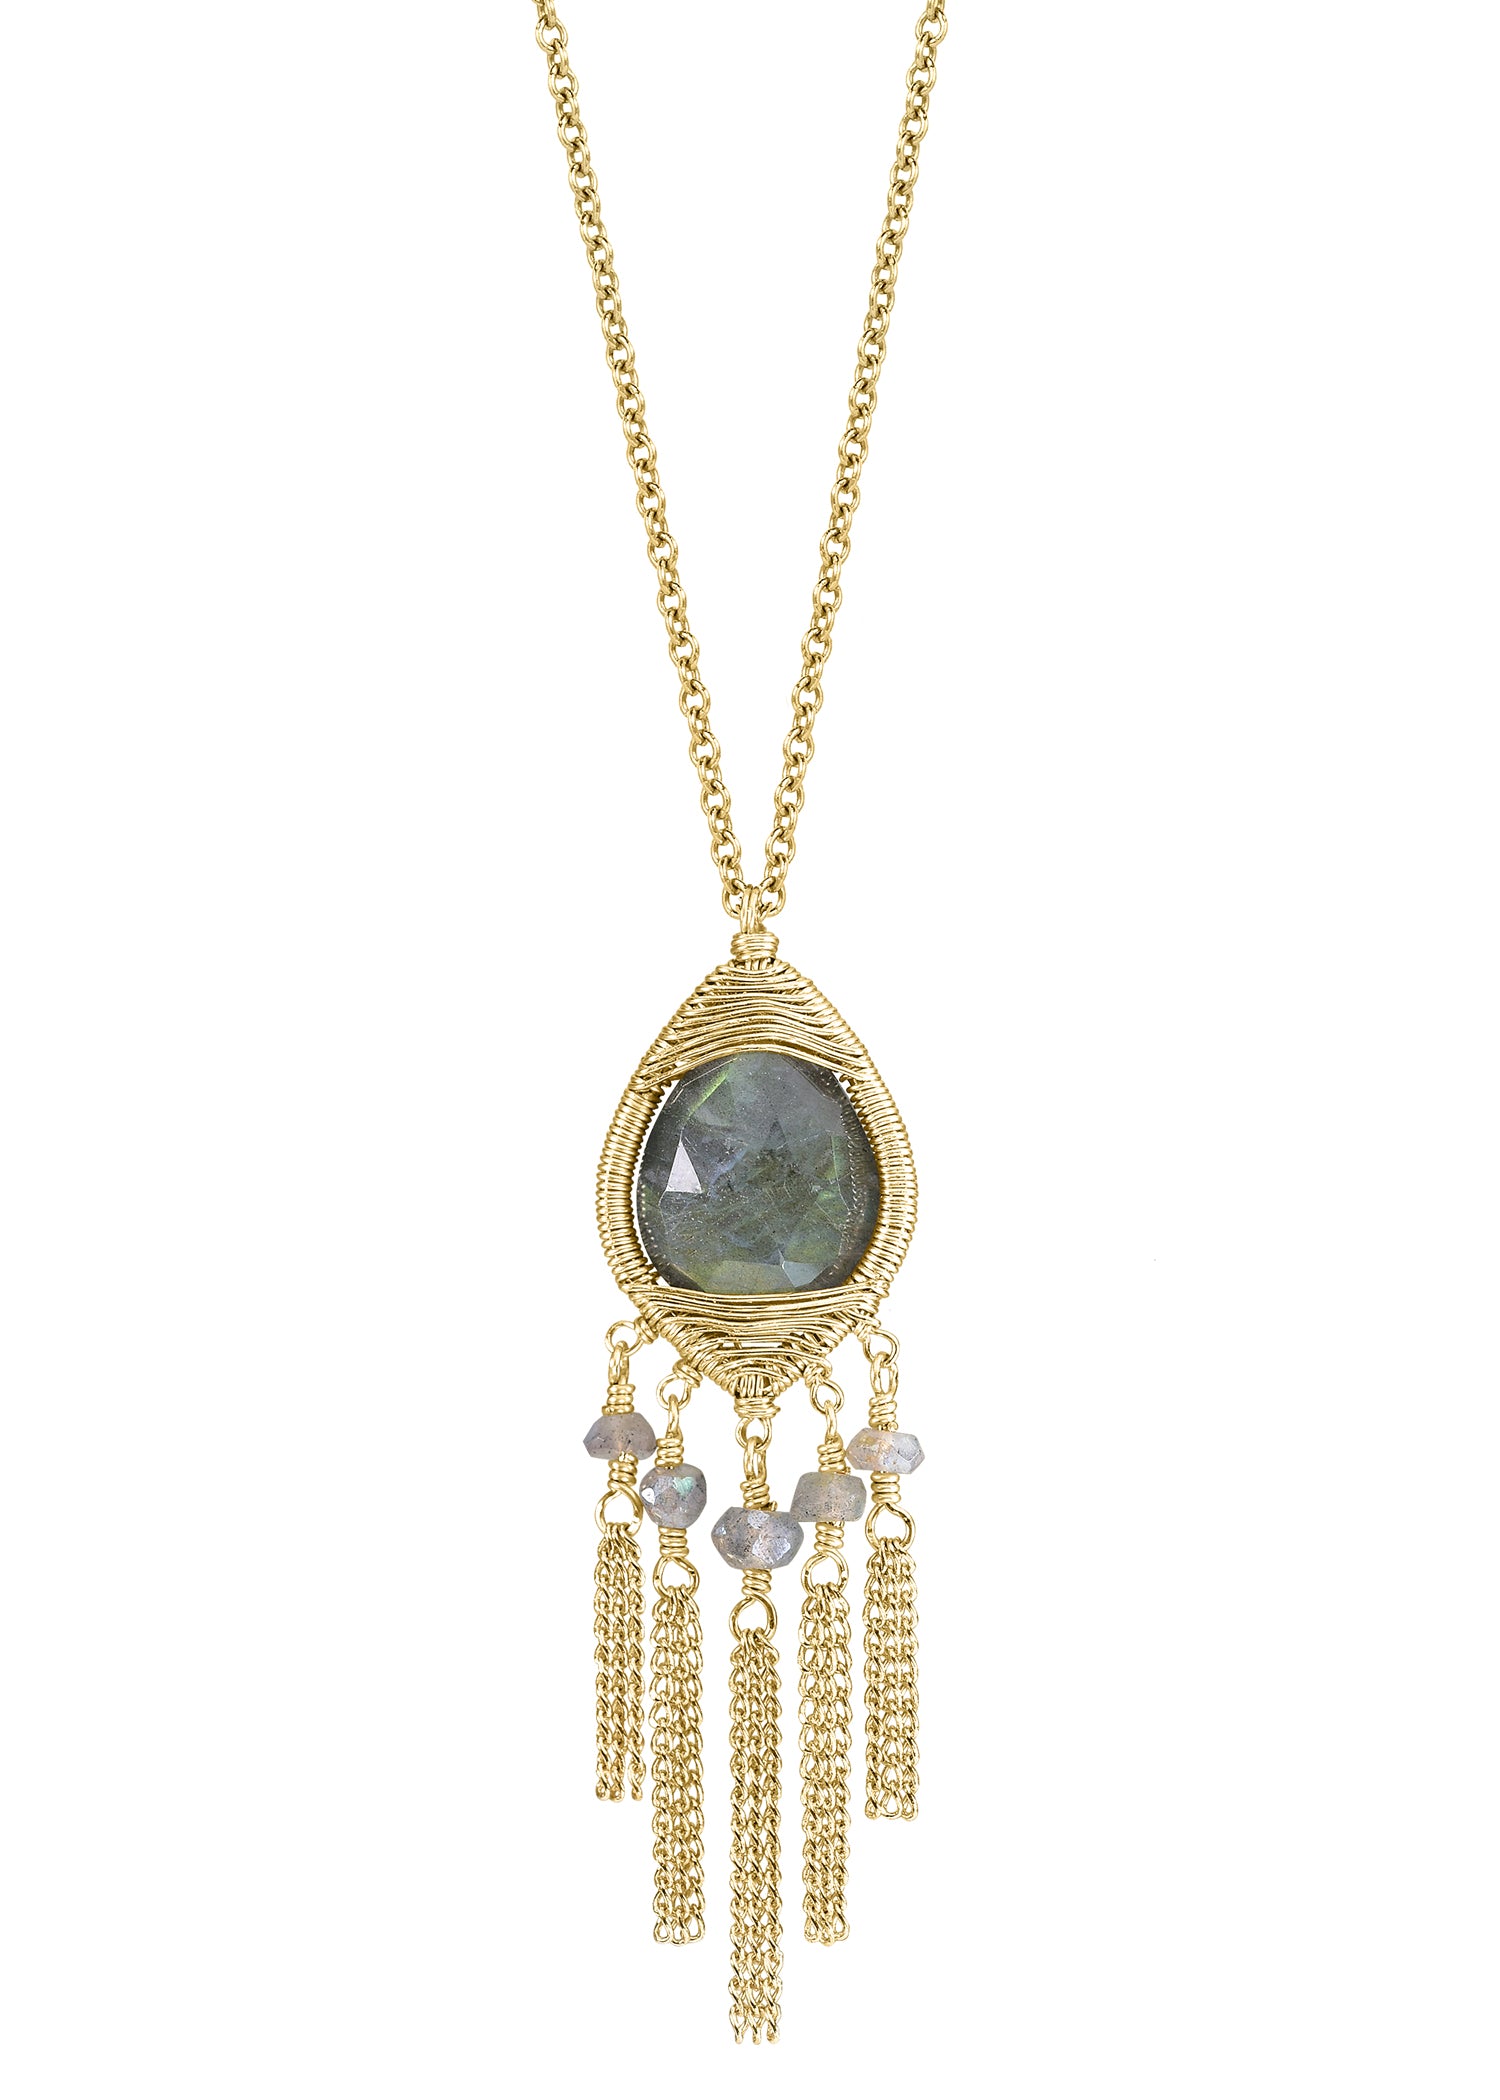 Labradorite 14k gold fill Necklace measures 18" in length Pendant measures 1-3/4" in length and 5/8" in width across the widest point Handmade in our Los Angeles studio